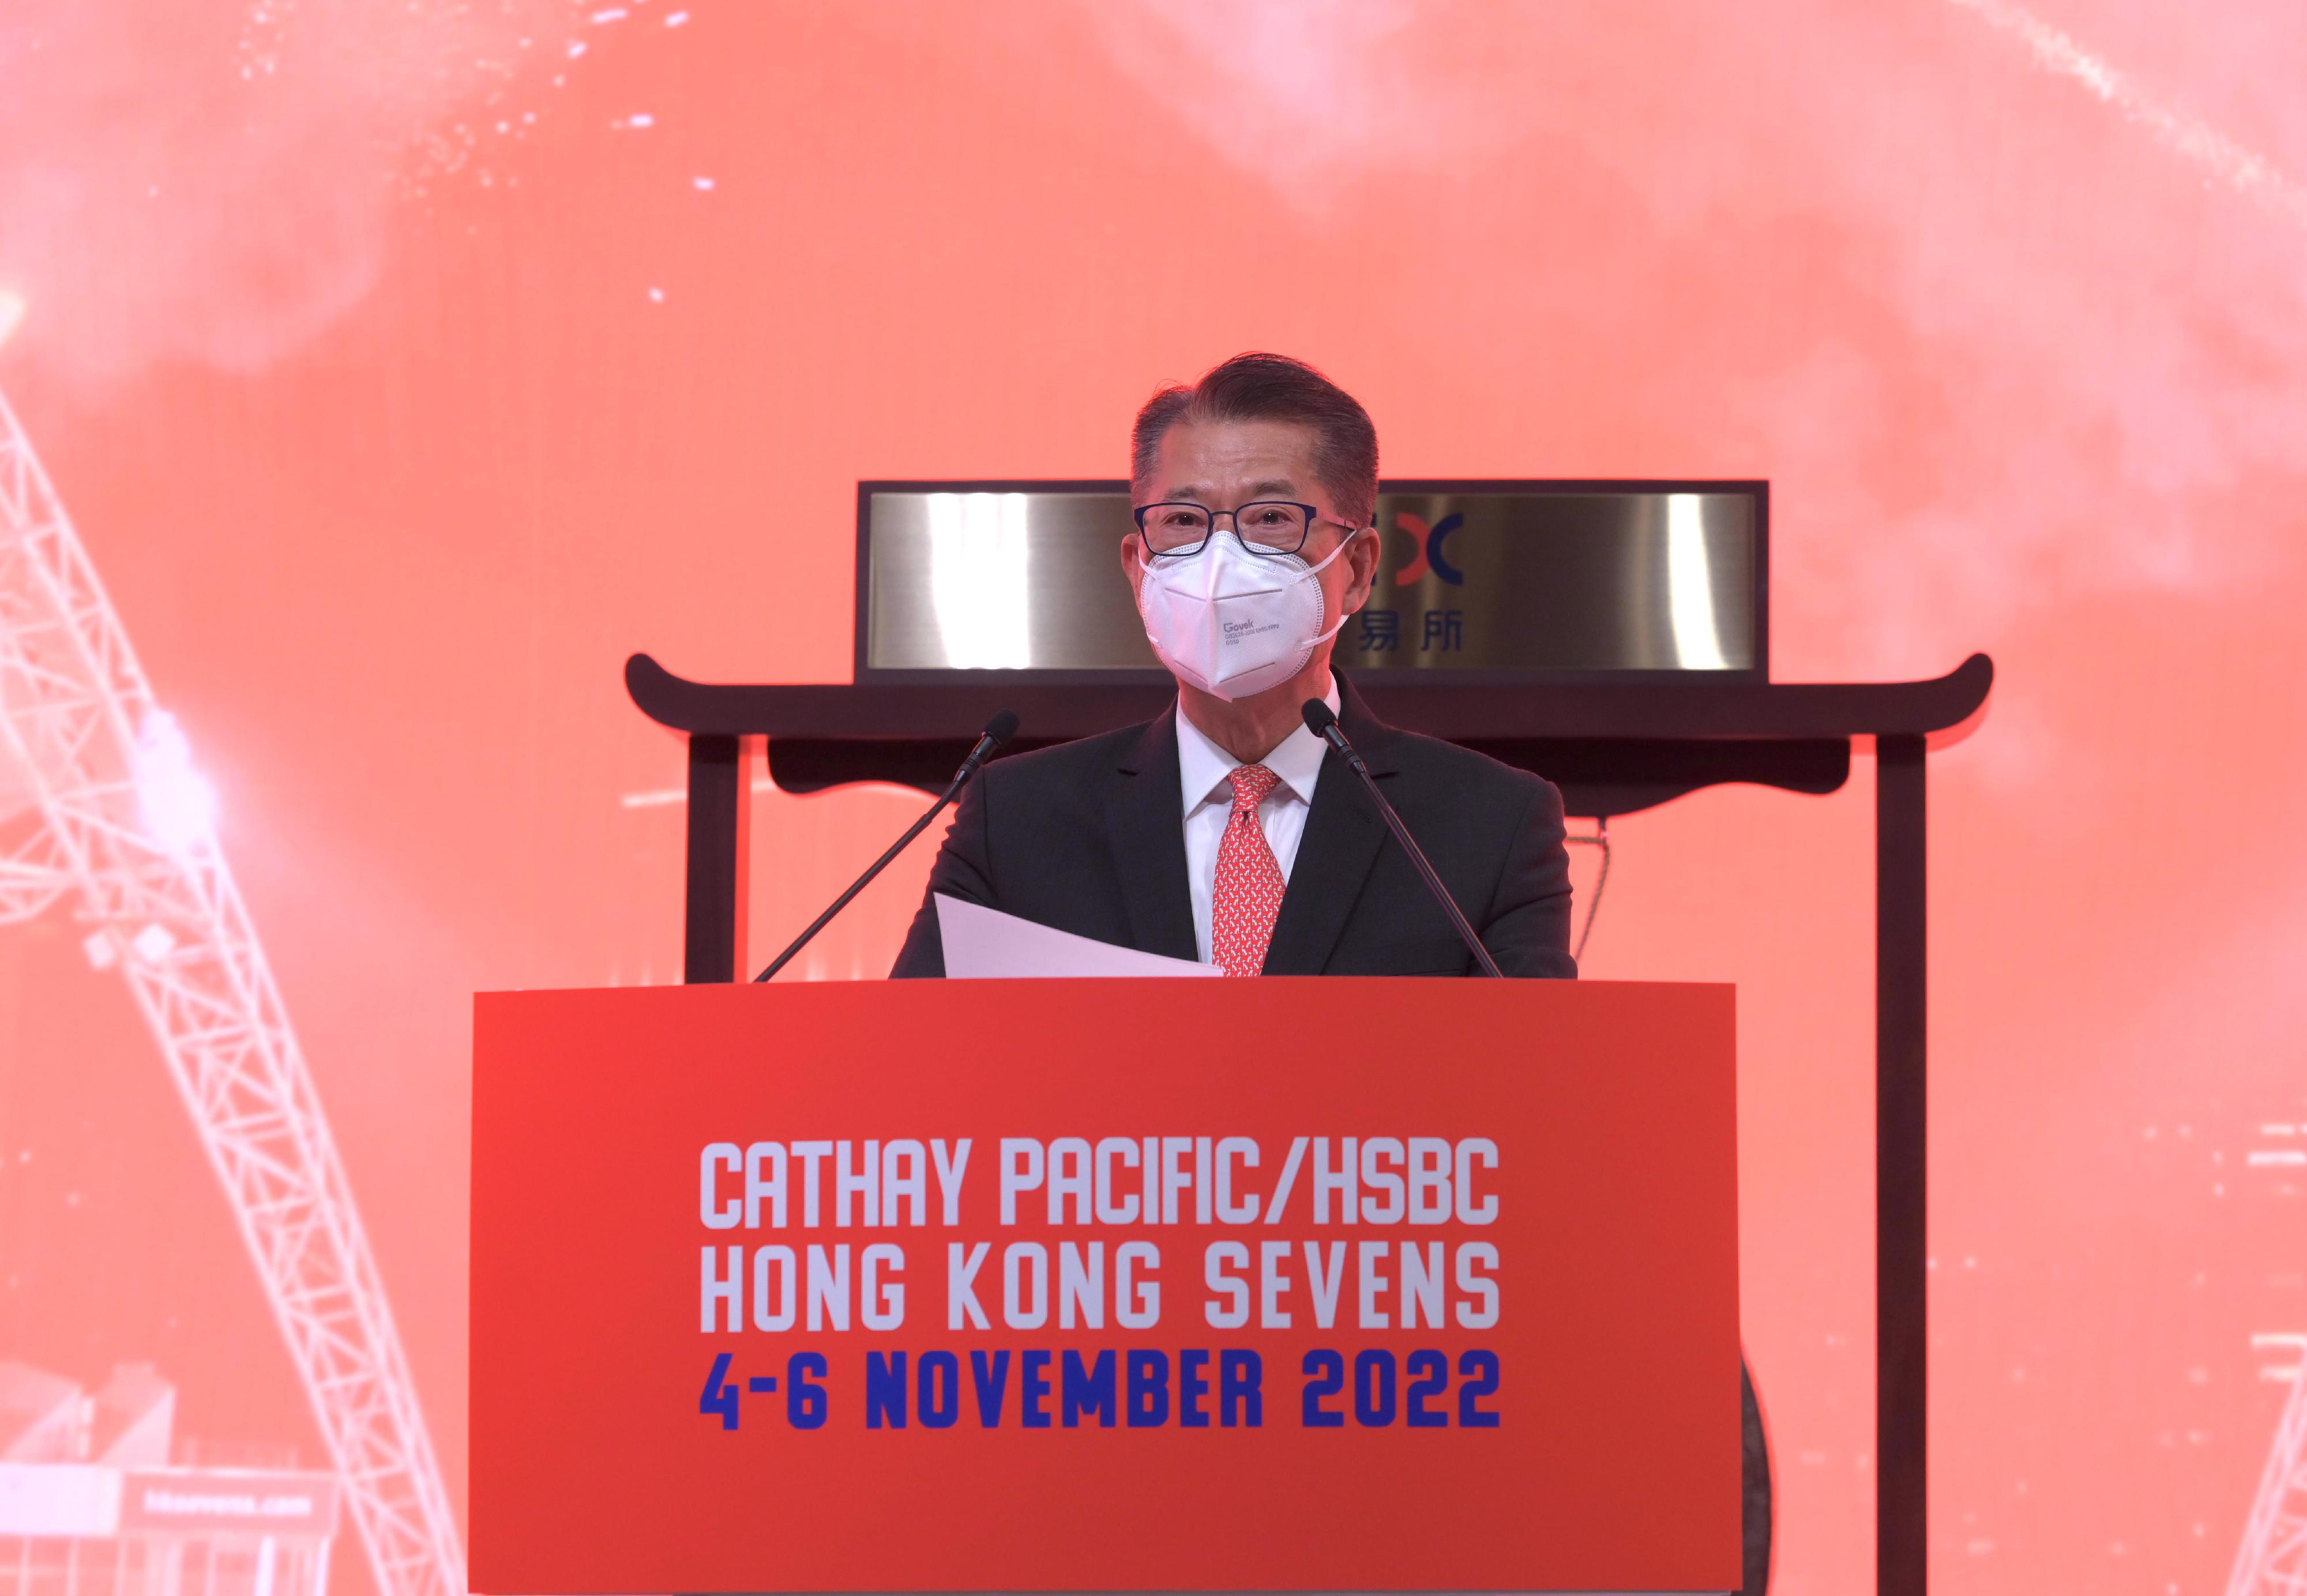 The Financial Secretary, Mr Paul Chan, speaks at the Hong Kong Rugby Sevens media briefing and celebration ceremony today (September 23).